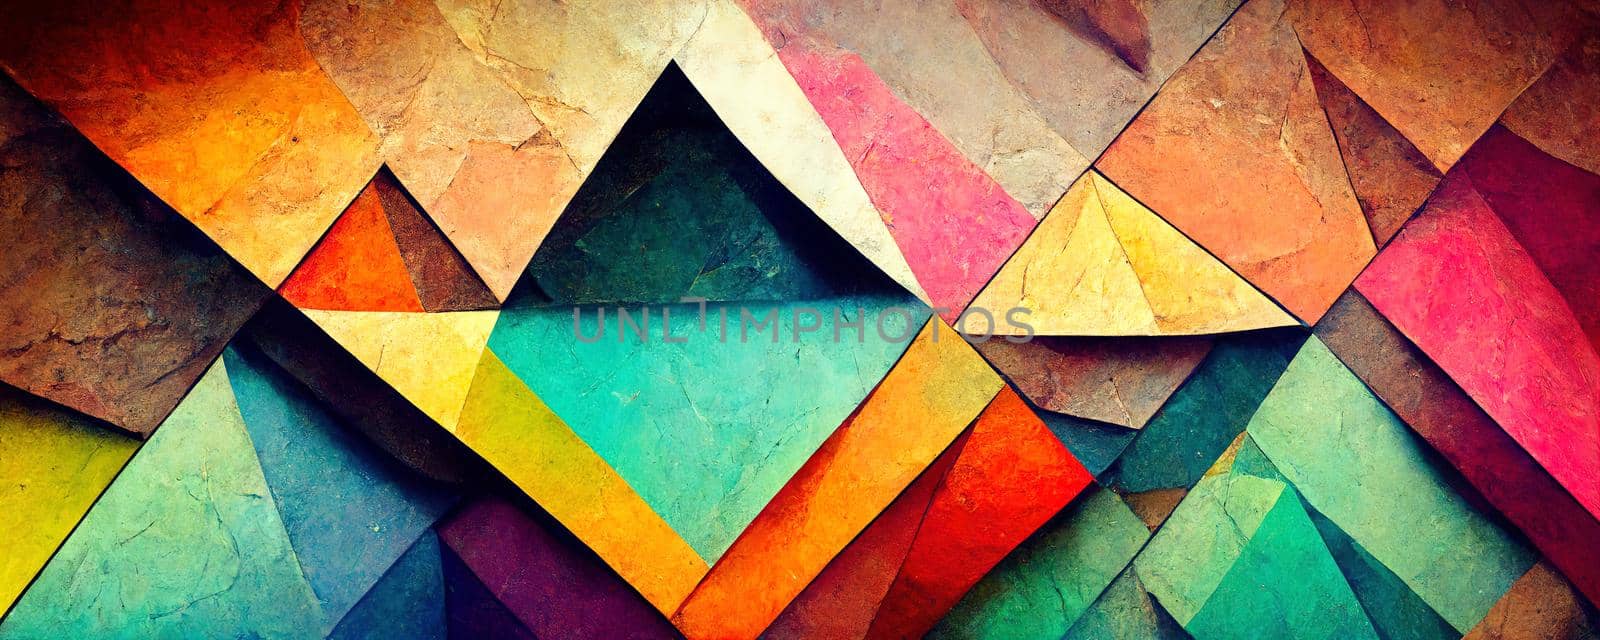 abstract 3D illustrations in the form of geometric triangles and polygons creating a bright background by TRMK